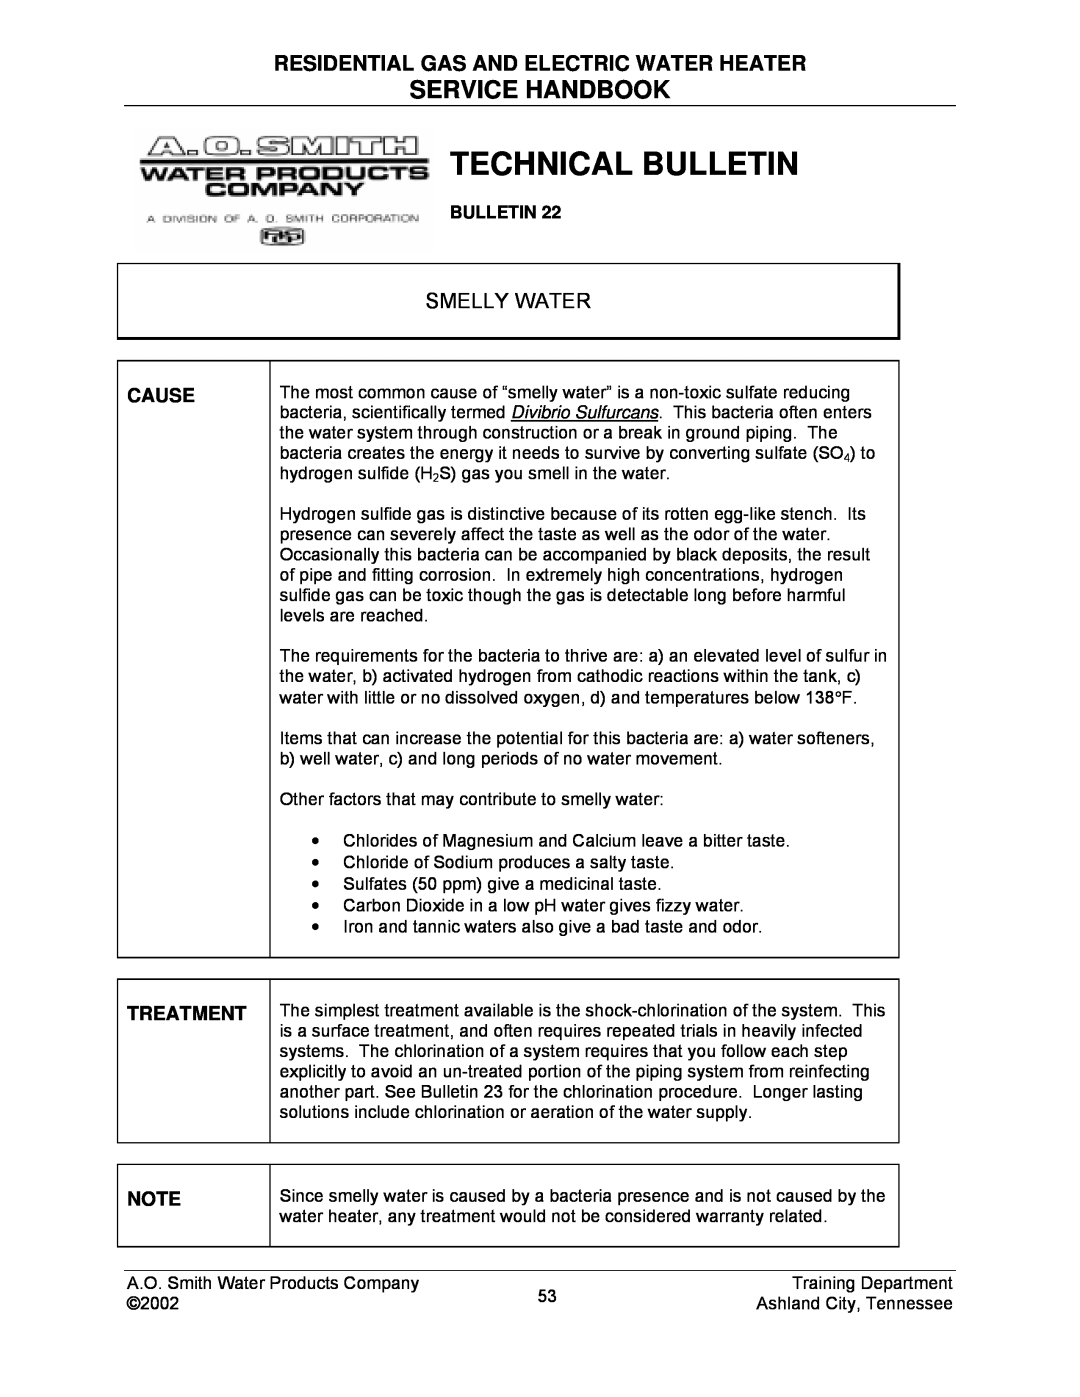 A.O. Smith TC-049-R2 manual Technical Bulletin, Service Handbook, Residential Gas And Electric Water Heater, Smelly Water 